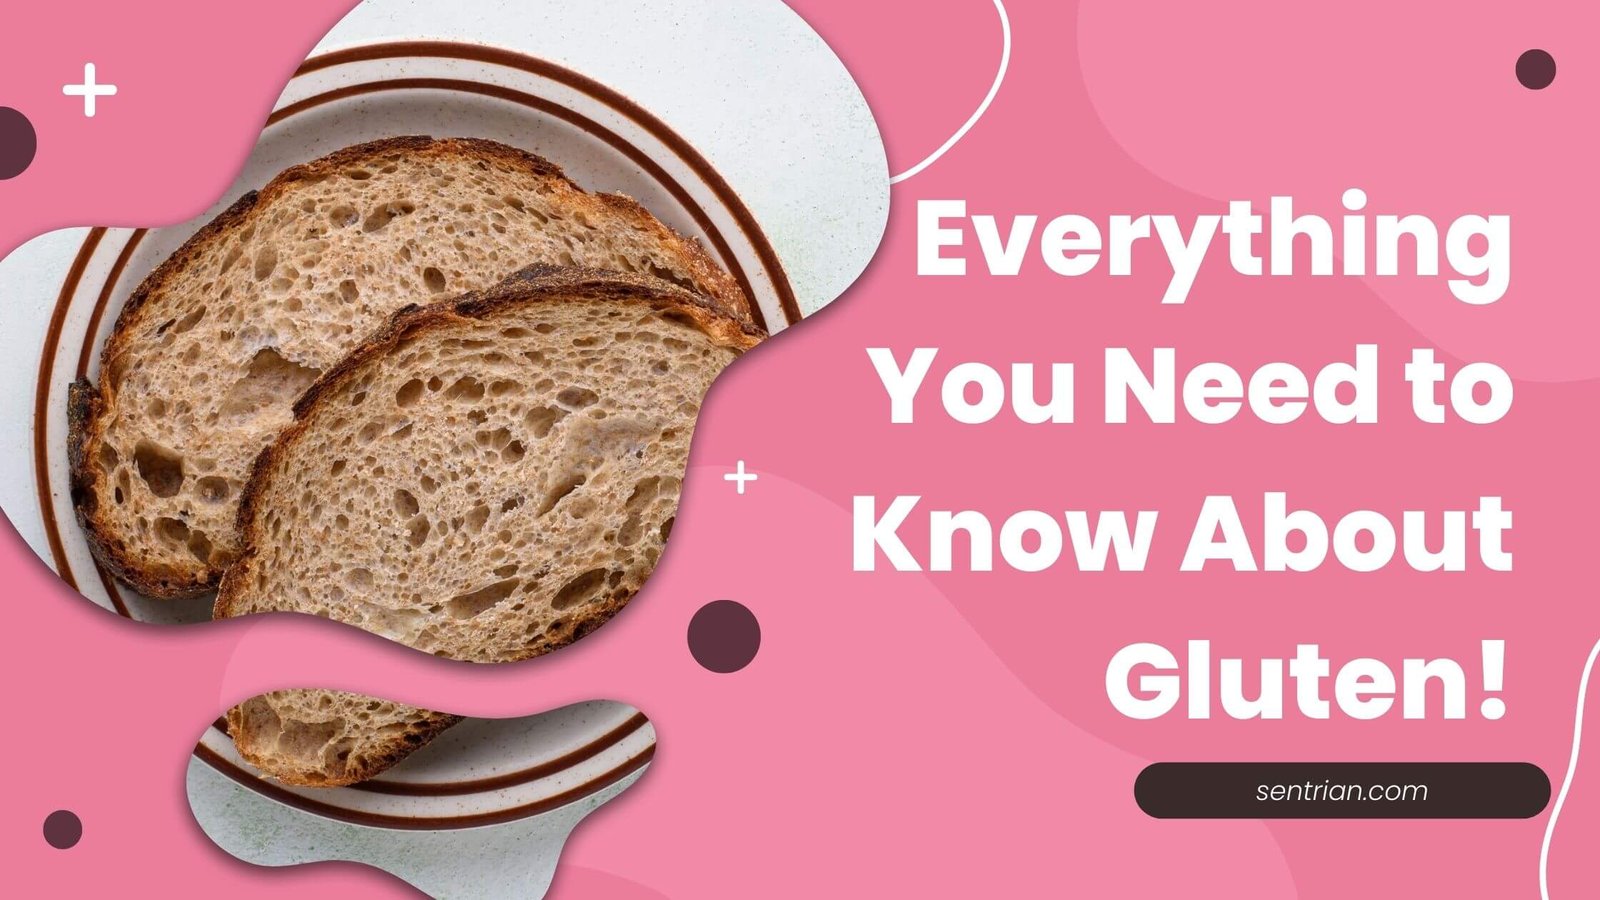 Everything You Need to Know About Gluten!